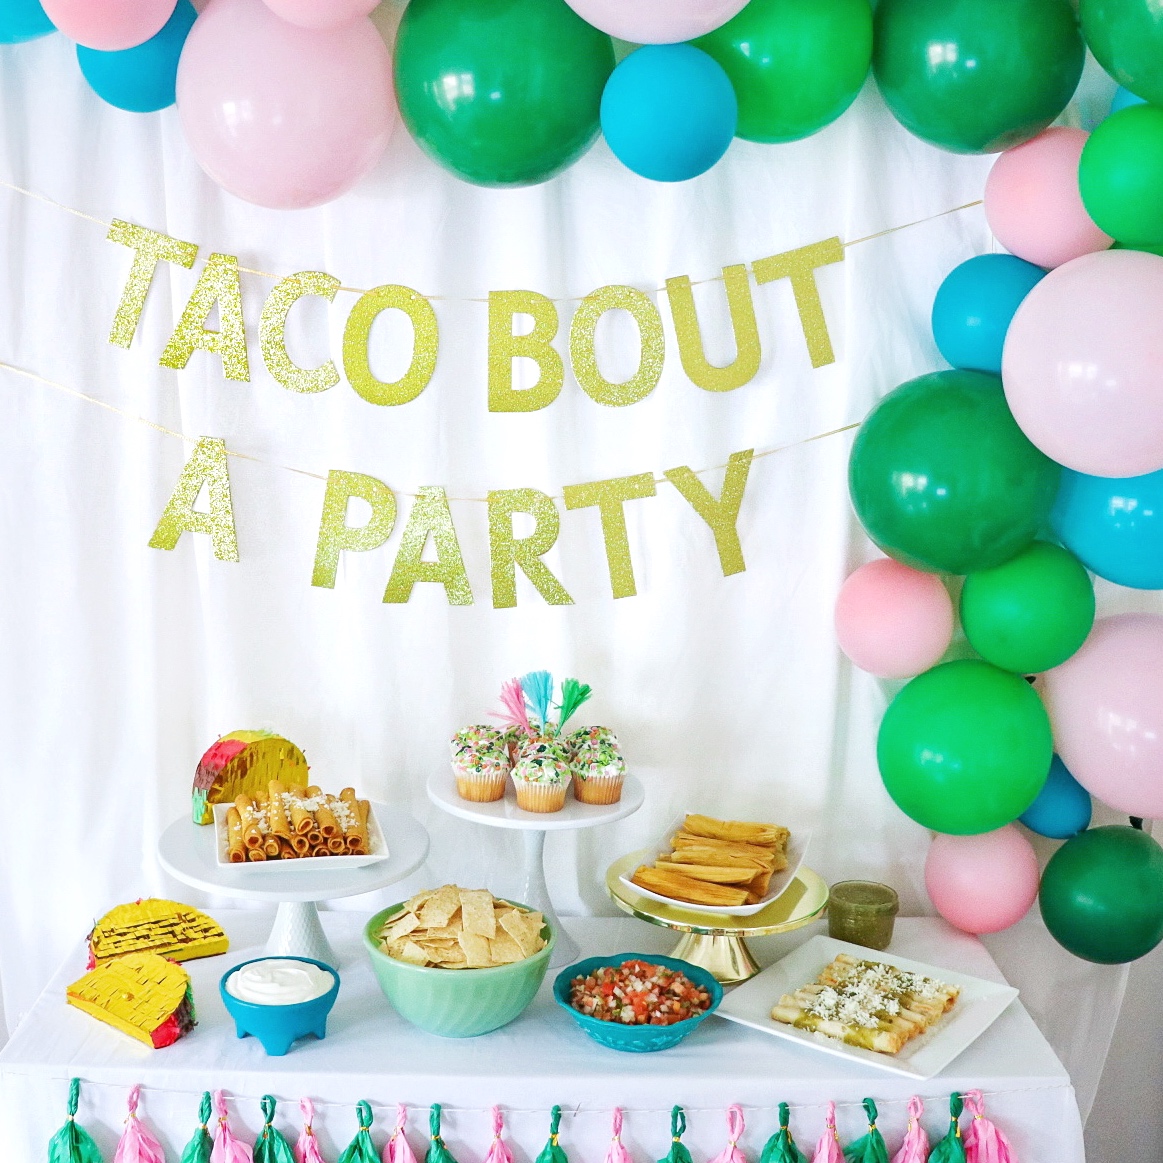 taco bout a party decorations